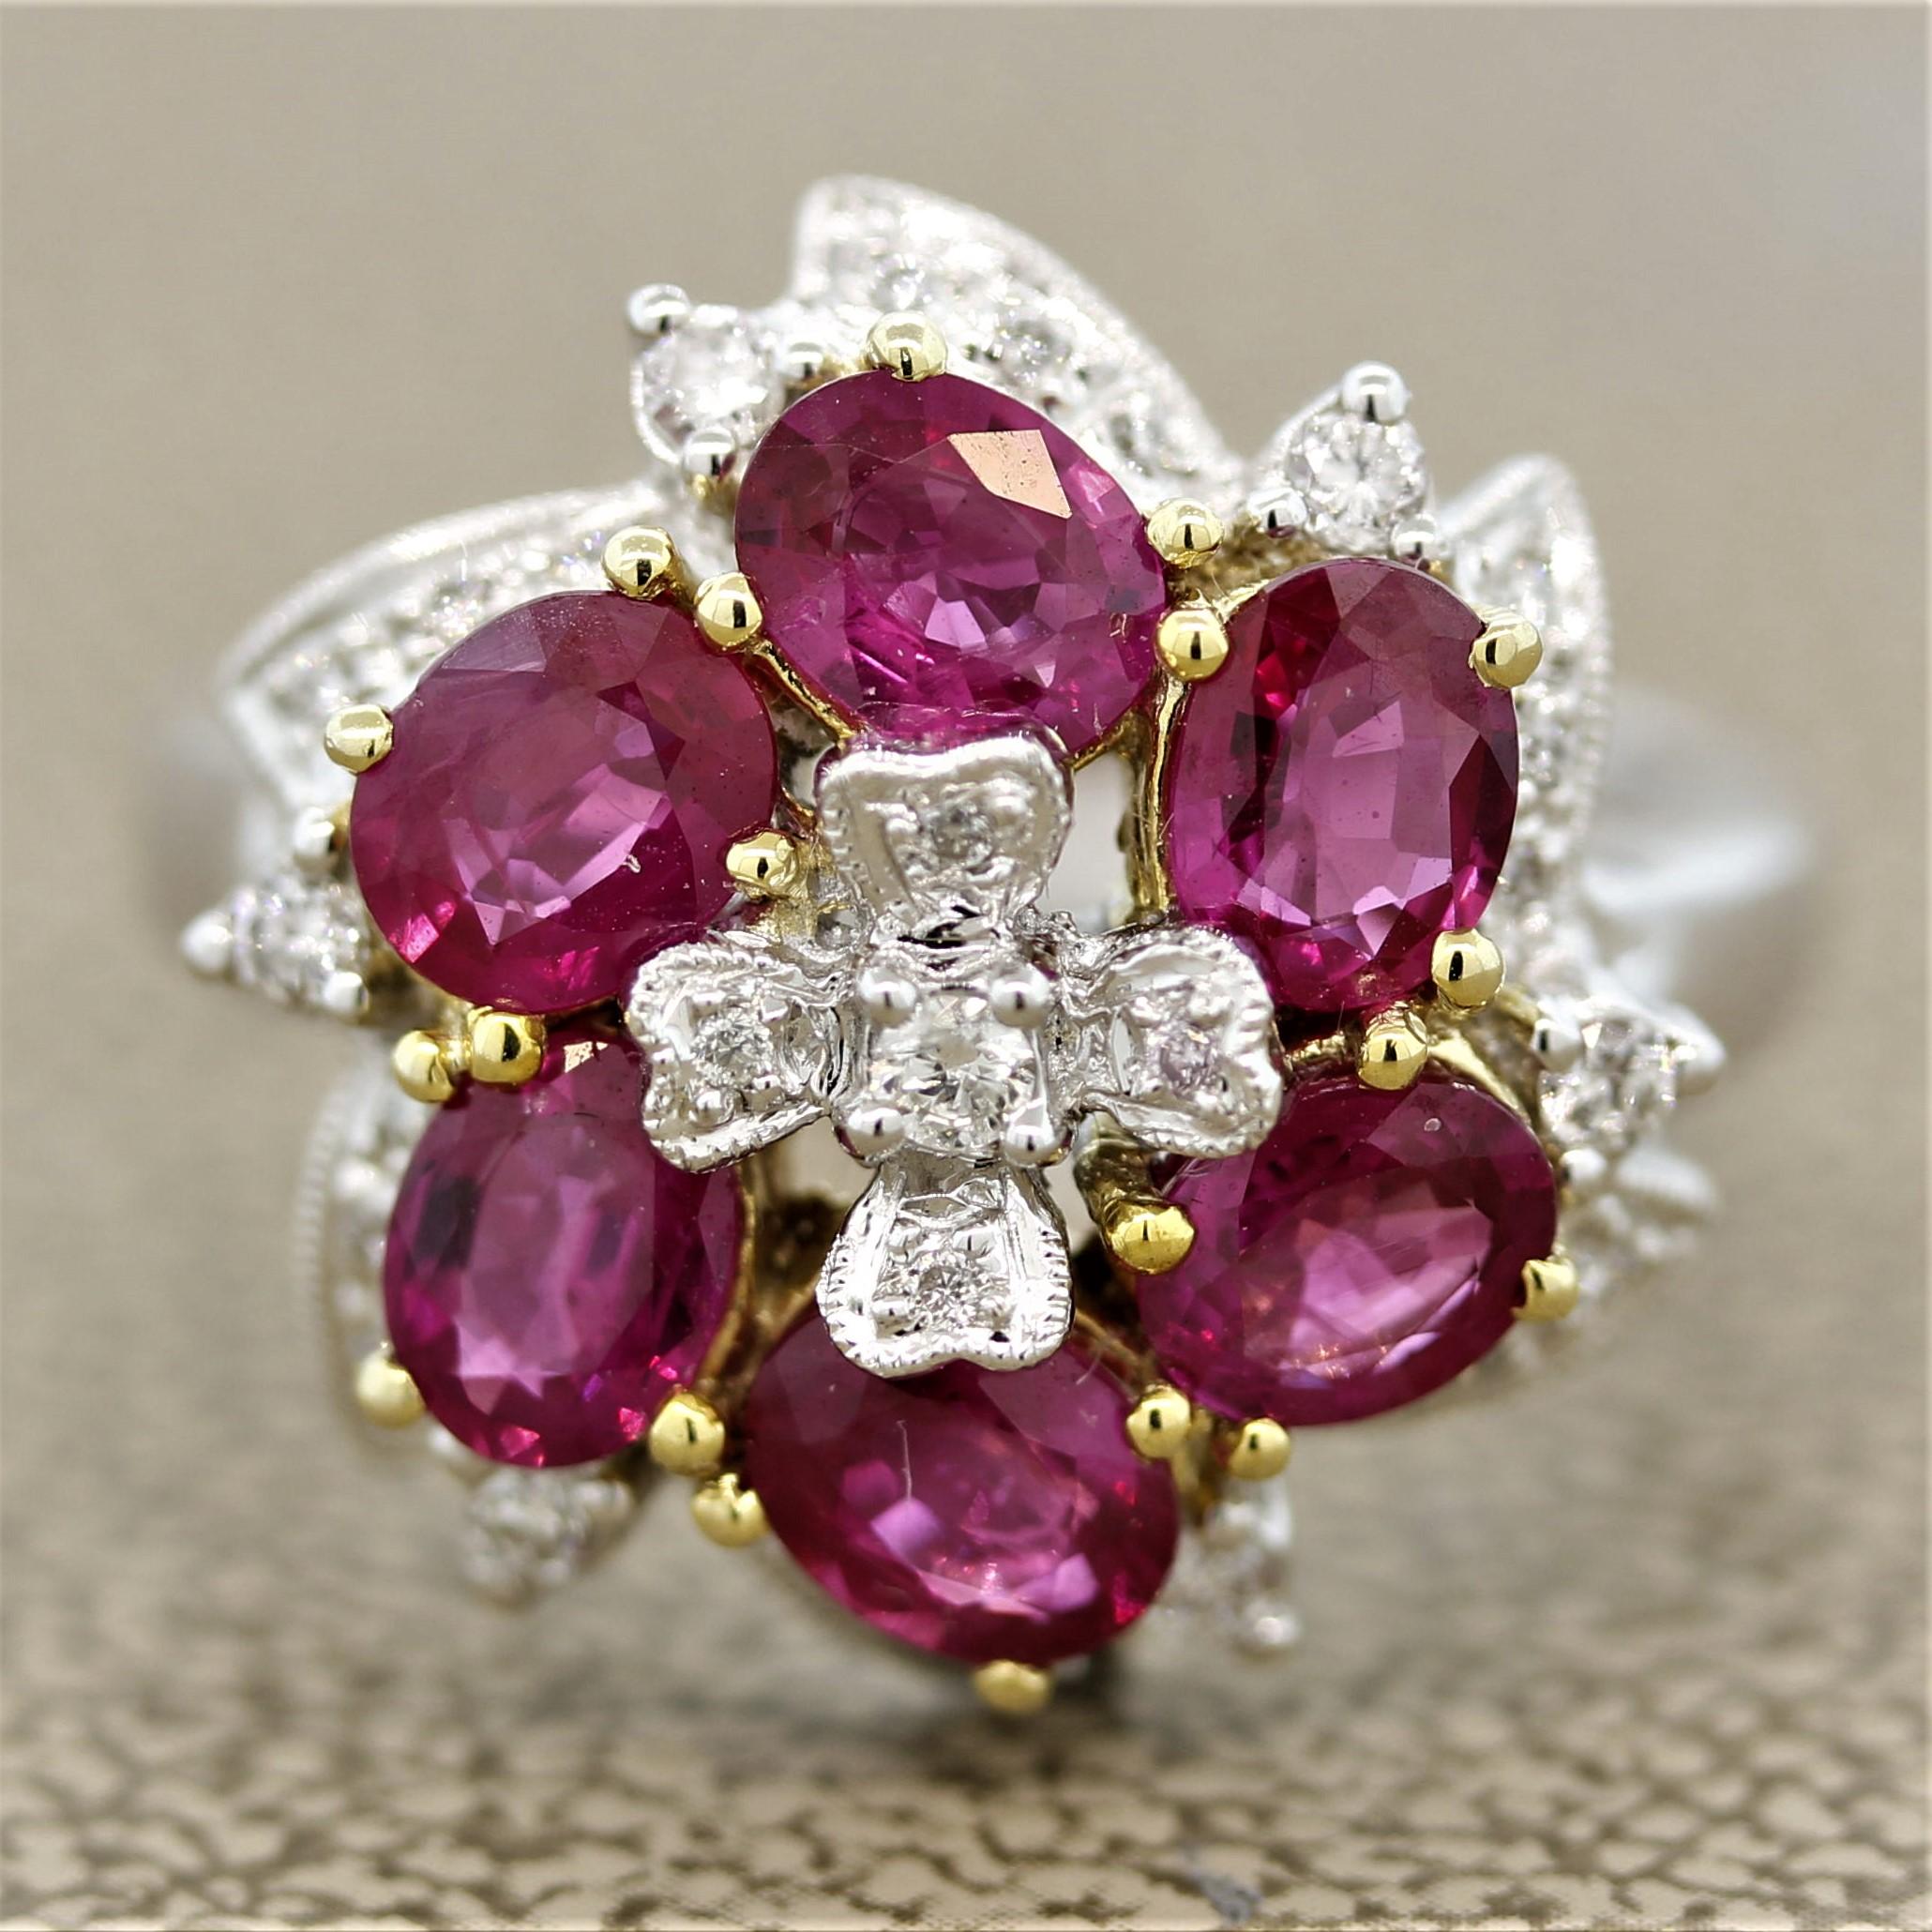 An elegant ring designed as a flower. It features 2.16 carats of oval shaped rubies that make up the petals. They have a bright pinkish-red color and are accented by 0.27 carats of round brilliant cut diamonds. Set in 18k white and yellow